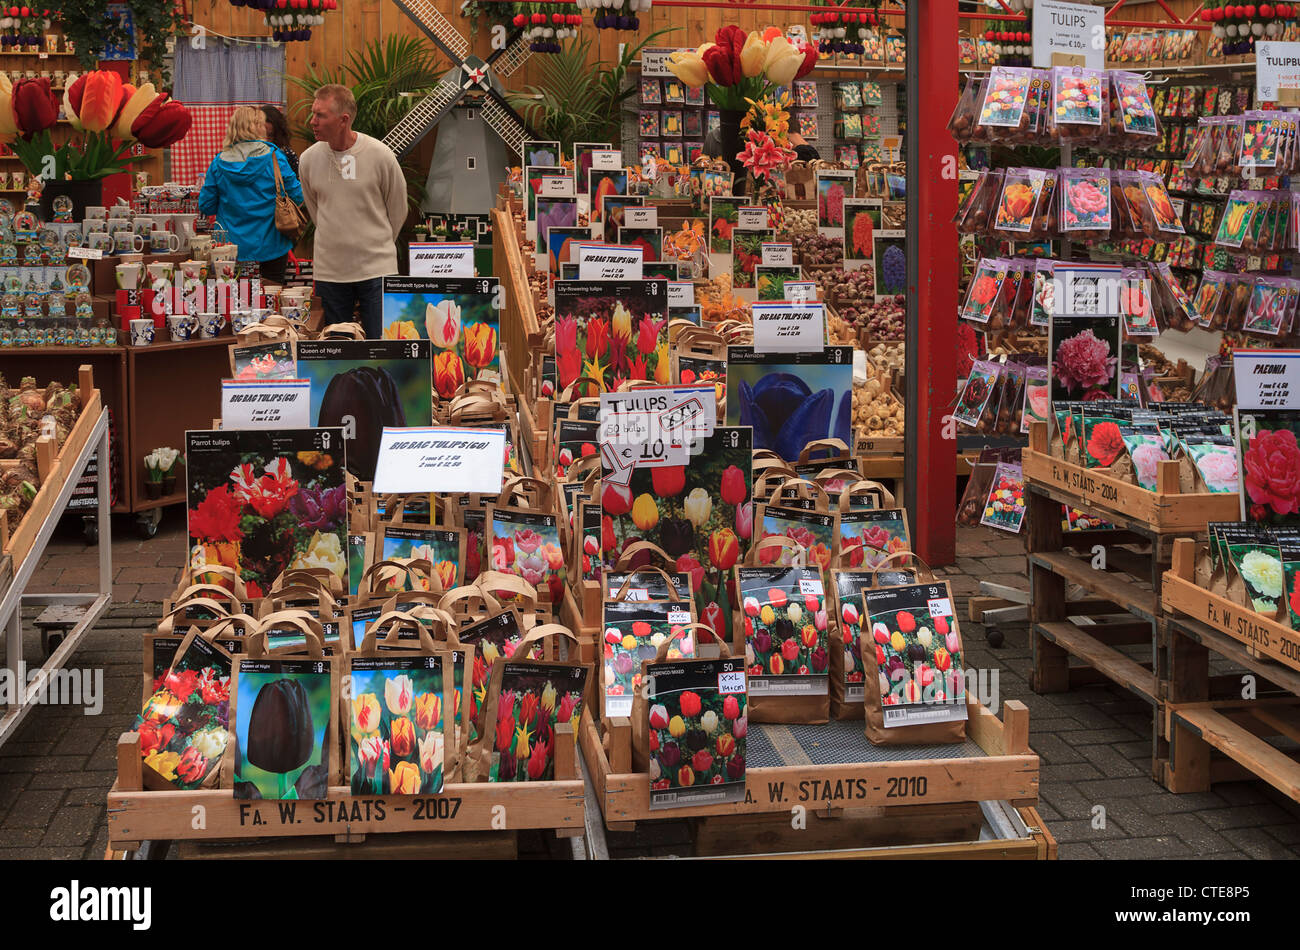 Tulip bulbs for sale in Amsterdam. A shop sells many kinds of bulbs as well as souvenirs to tourists. Stock Photo